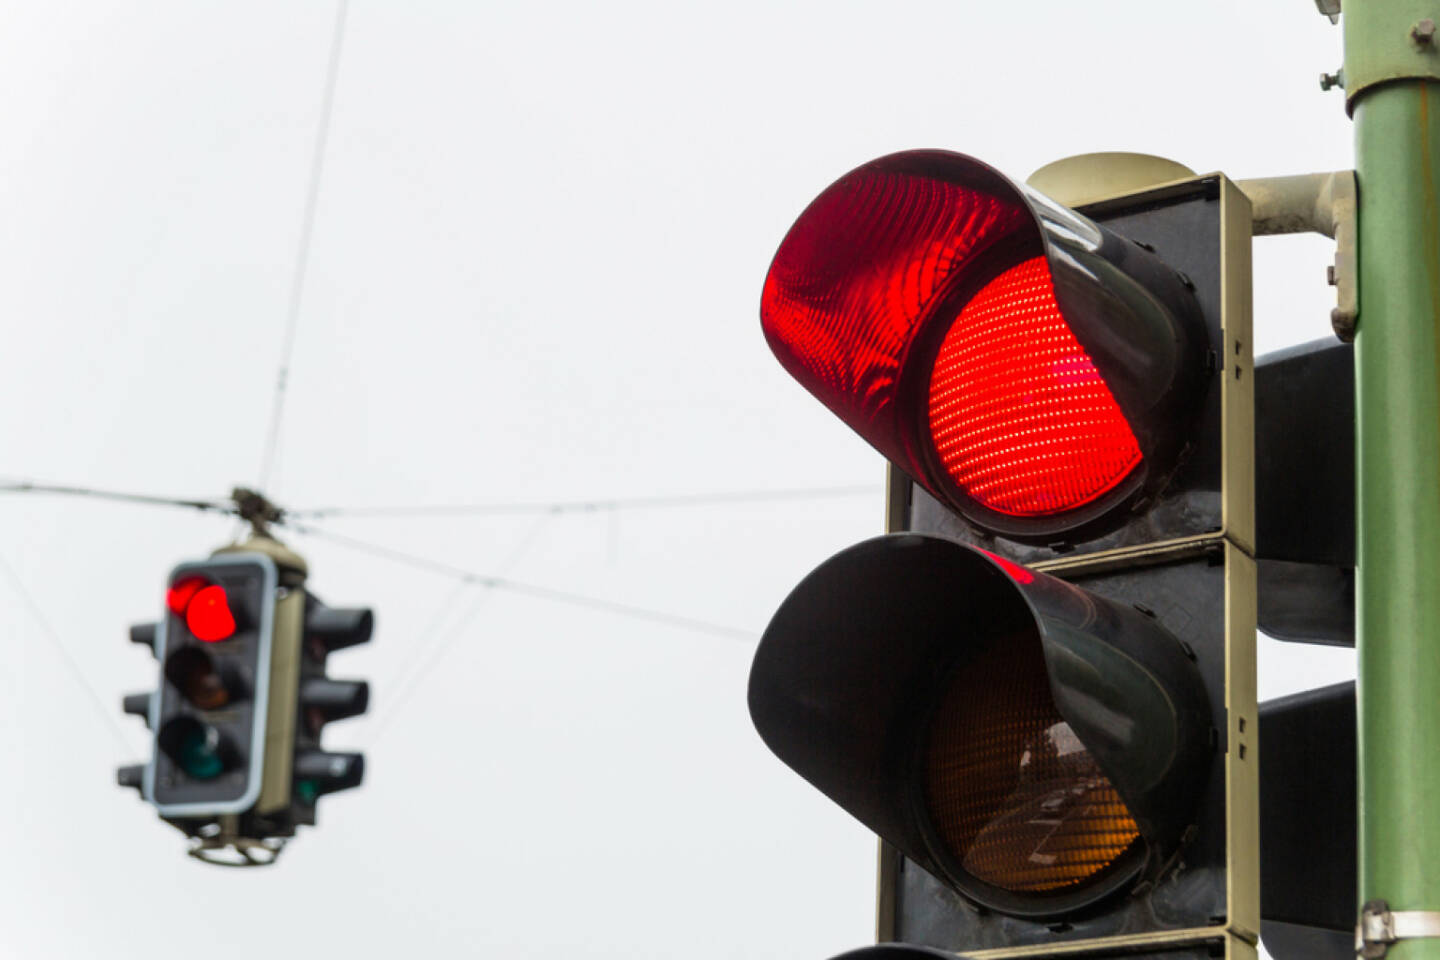 Ampel, rot, stop, halt, http://www.shutterstock.com/de/pic-132424568/stock-photo-a-traffic-light-with-red-light-symbolic-photo-for-maintenance-economy-failure.html 